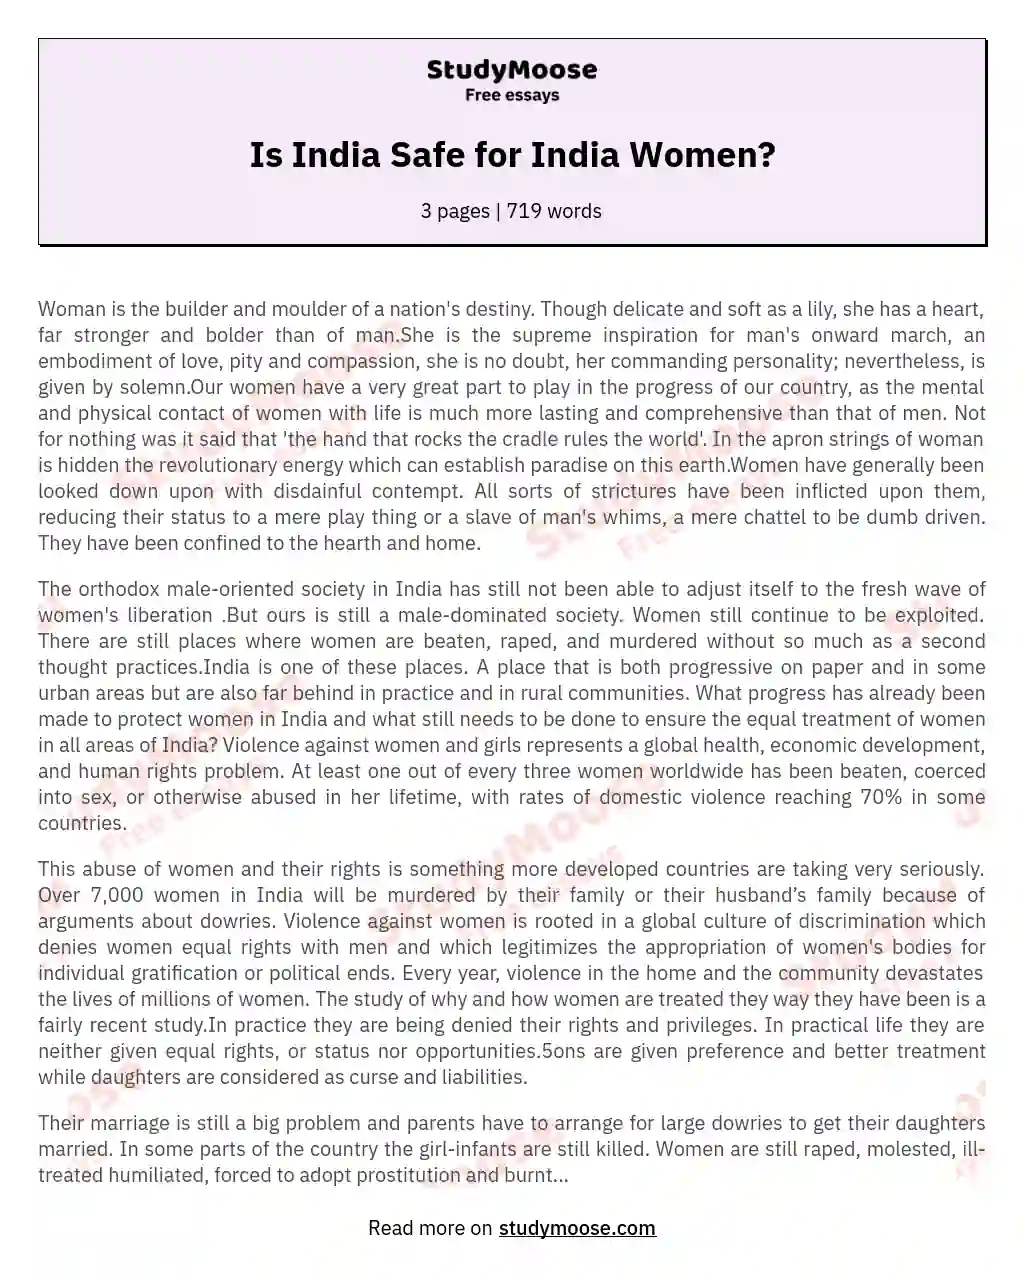 Is India Safe for India Women? essay